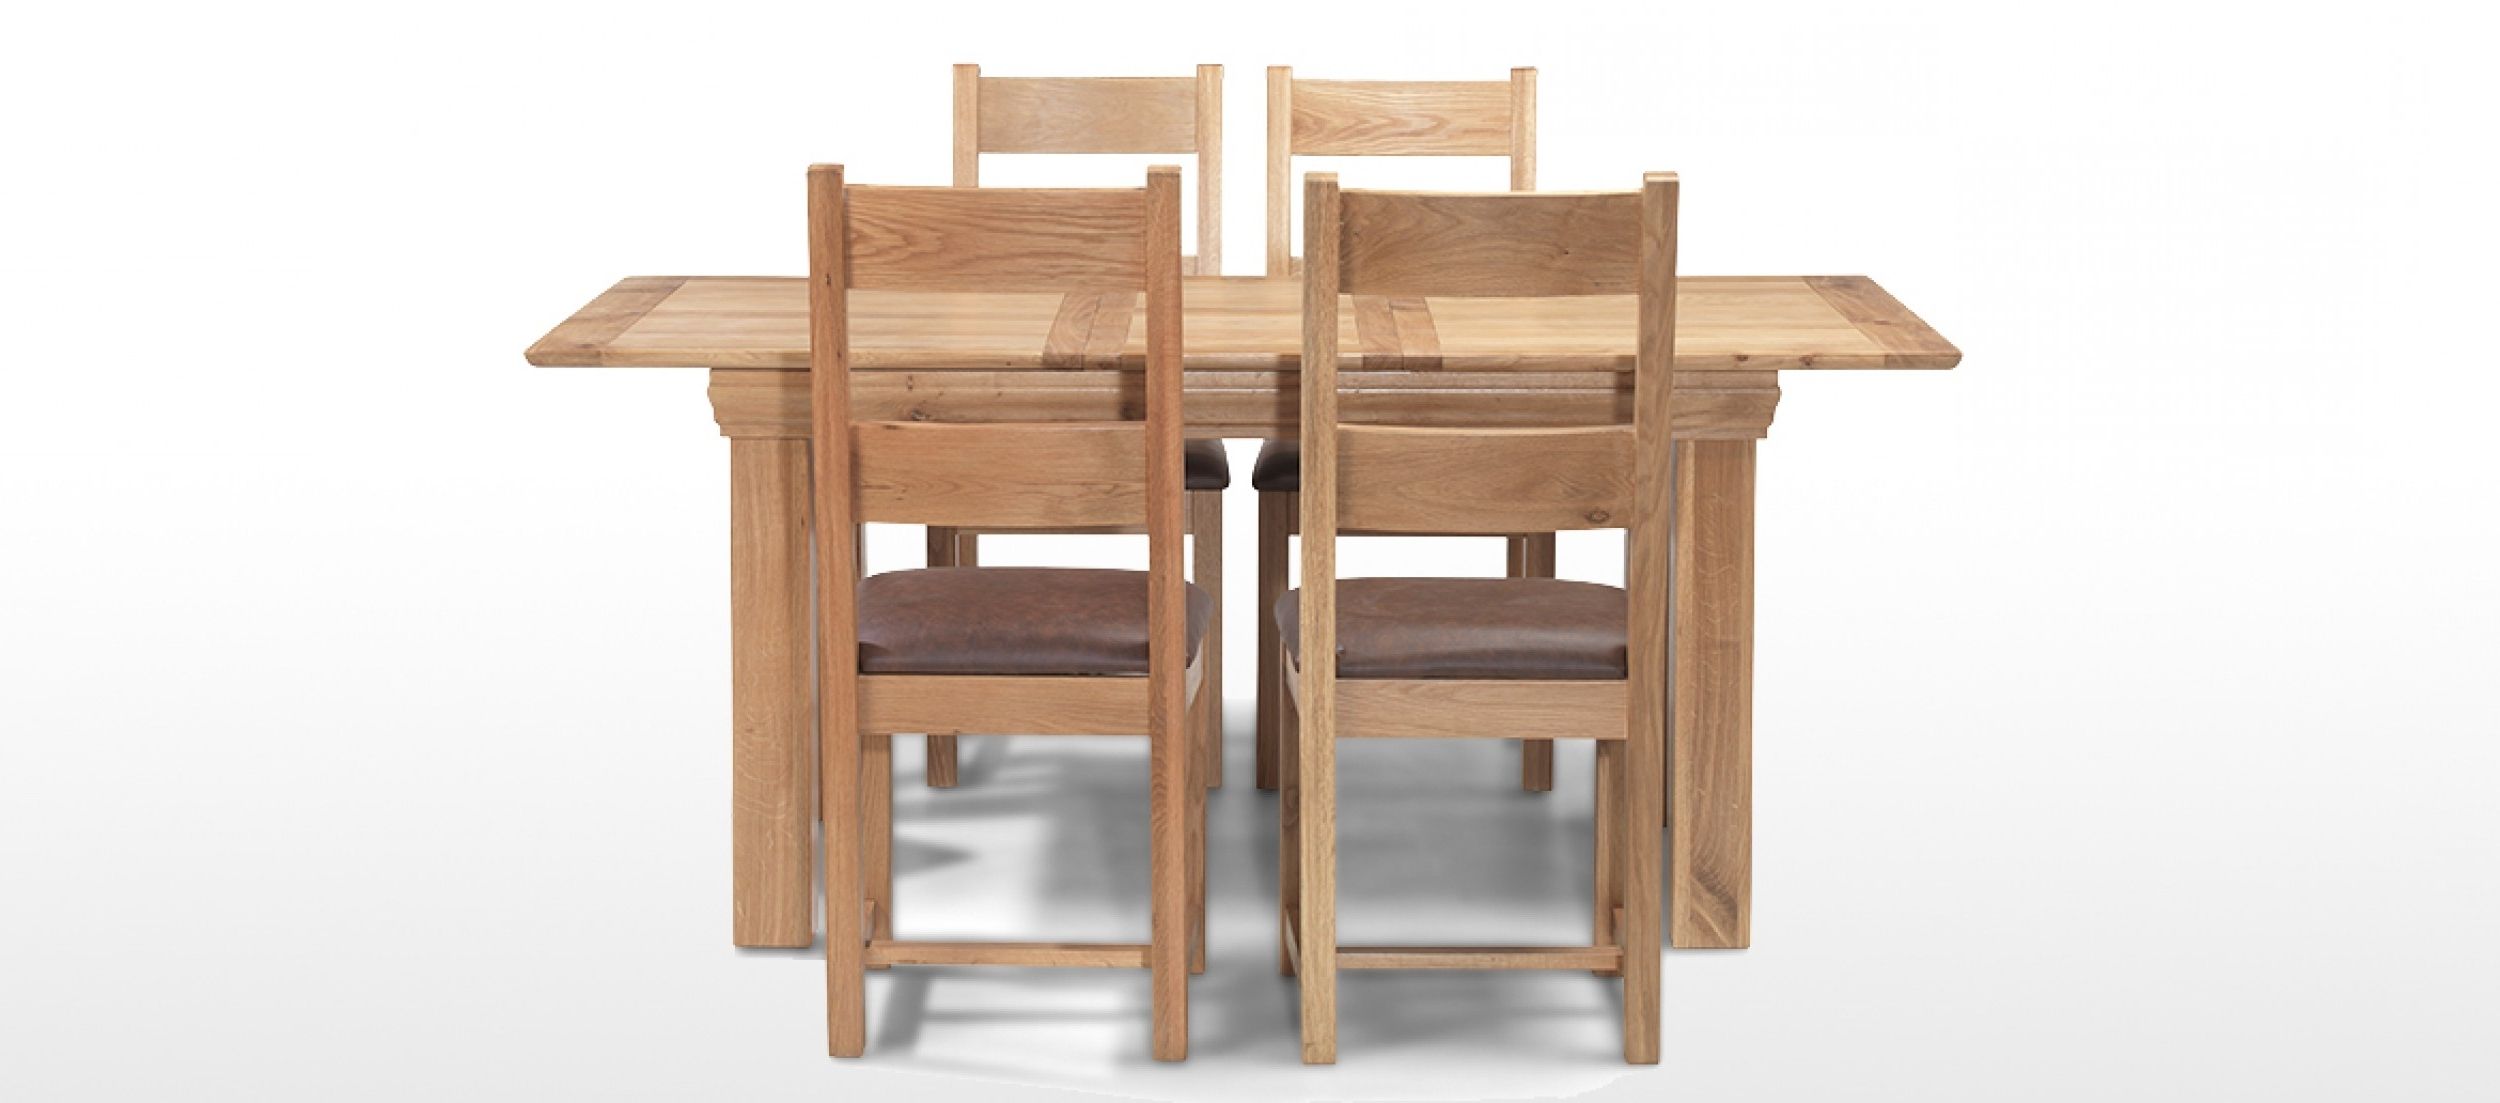 Most Up To Date Oak Dining Tables And 4 Chairs Regarding Constance Oak 140 180 Cm Extending Dining Table And 4 Chairs (View 12 of 25)